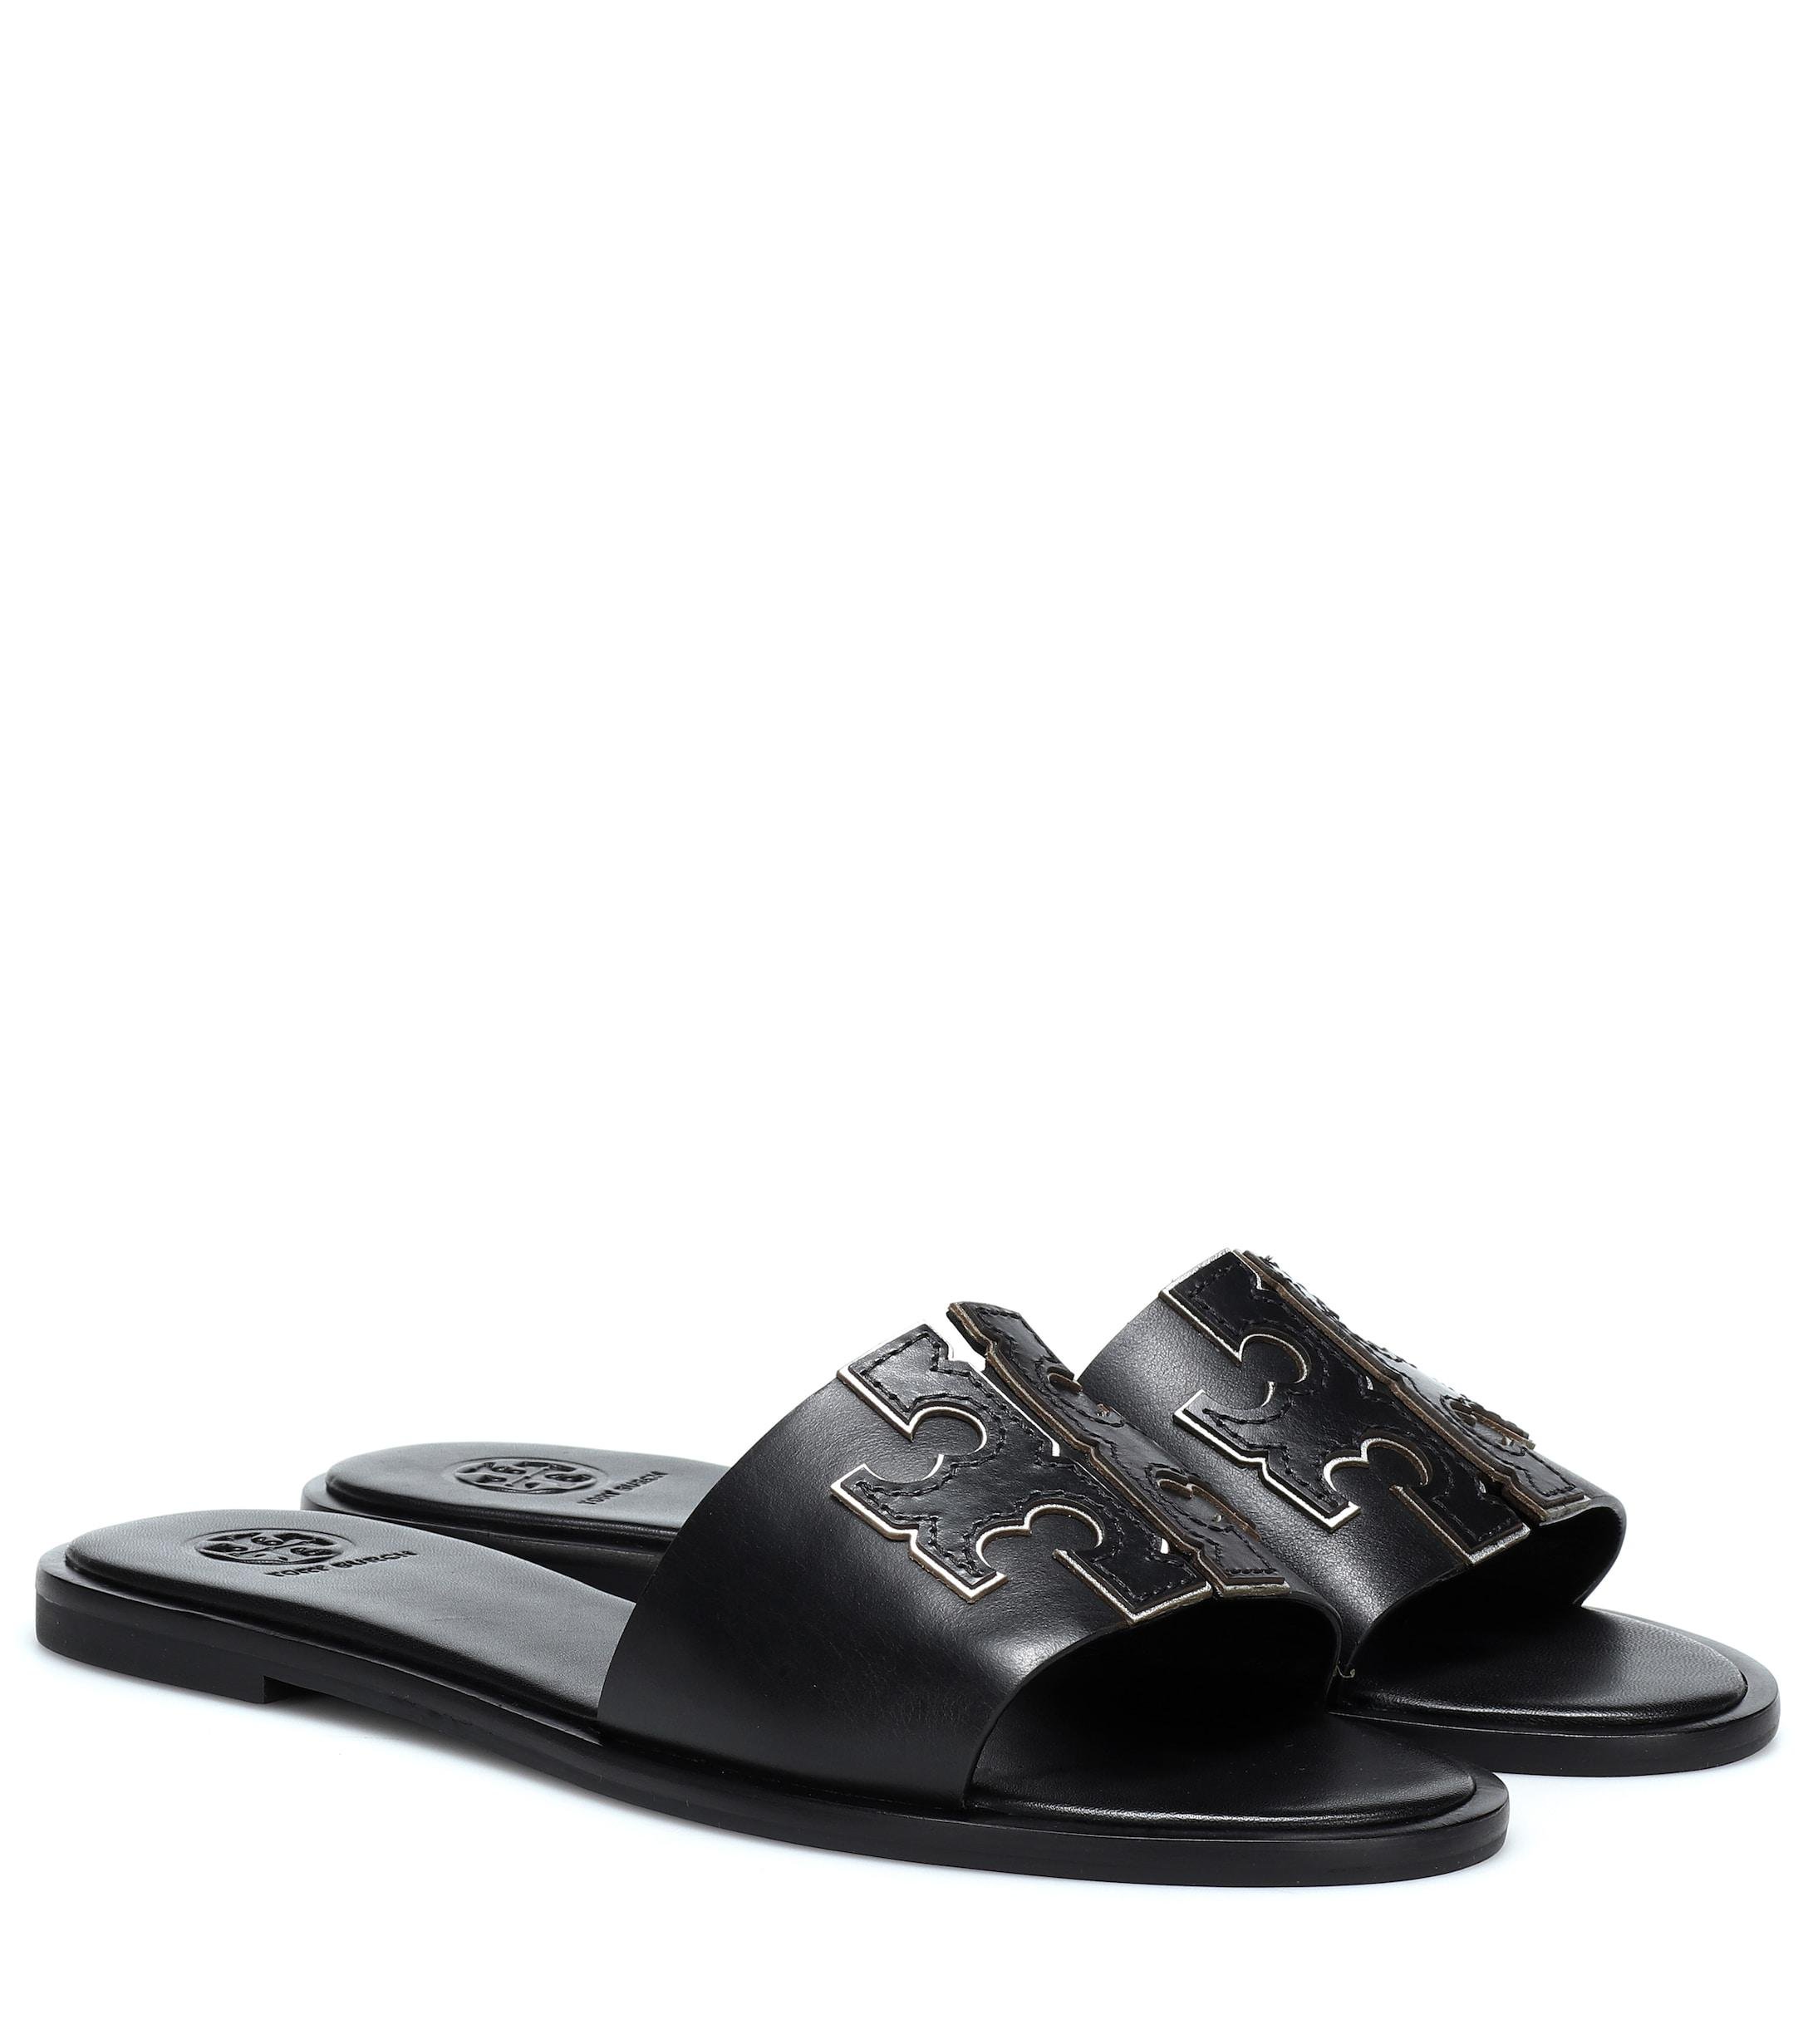 Tory Burch Ines Leather Slides in Black - Lyst